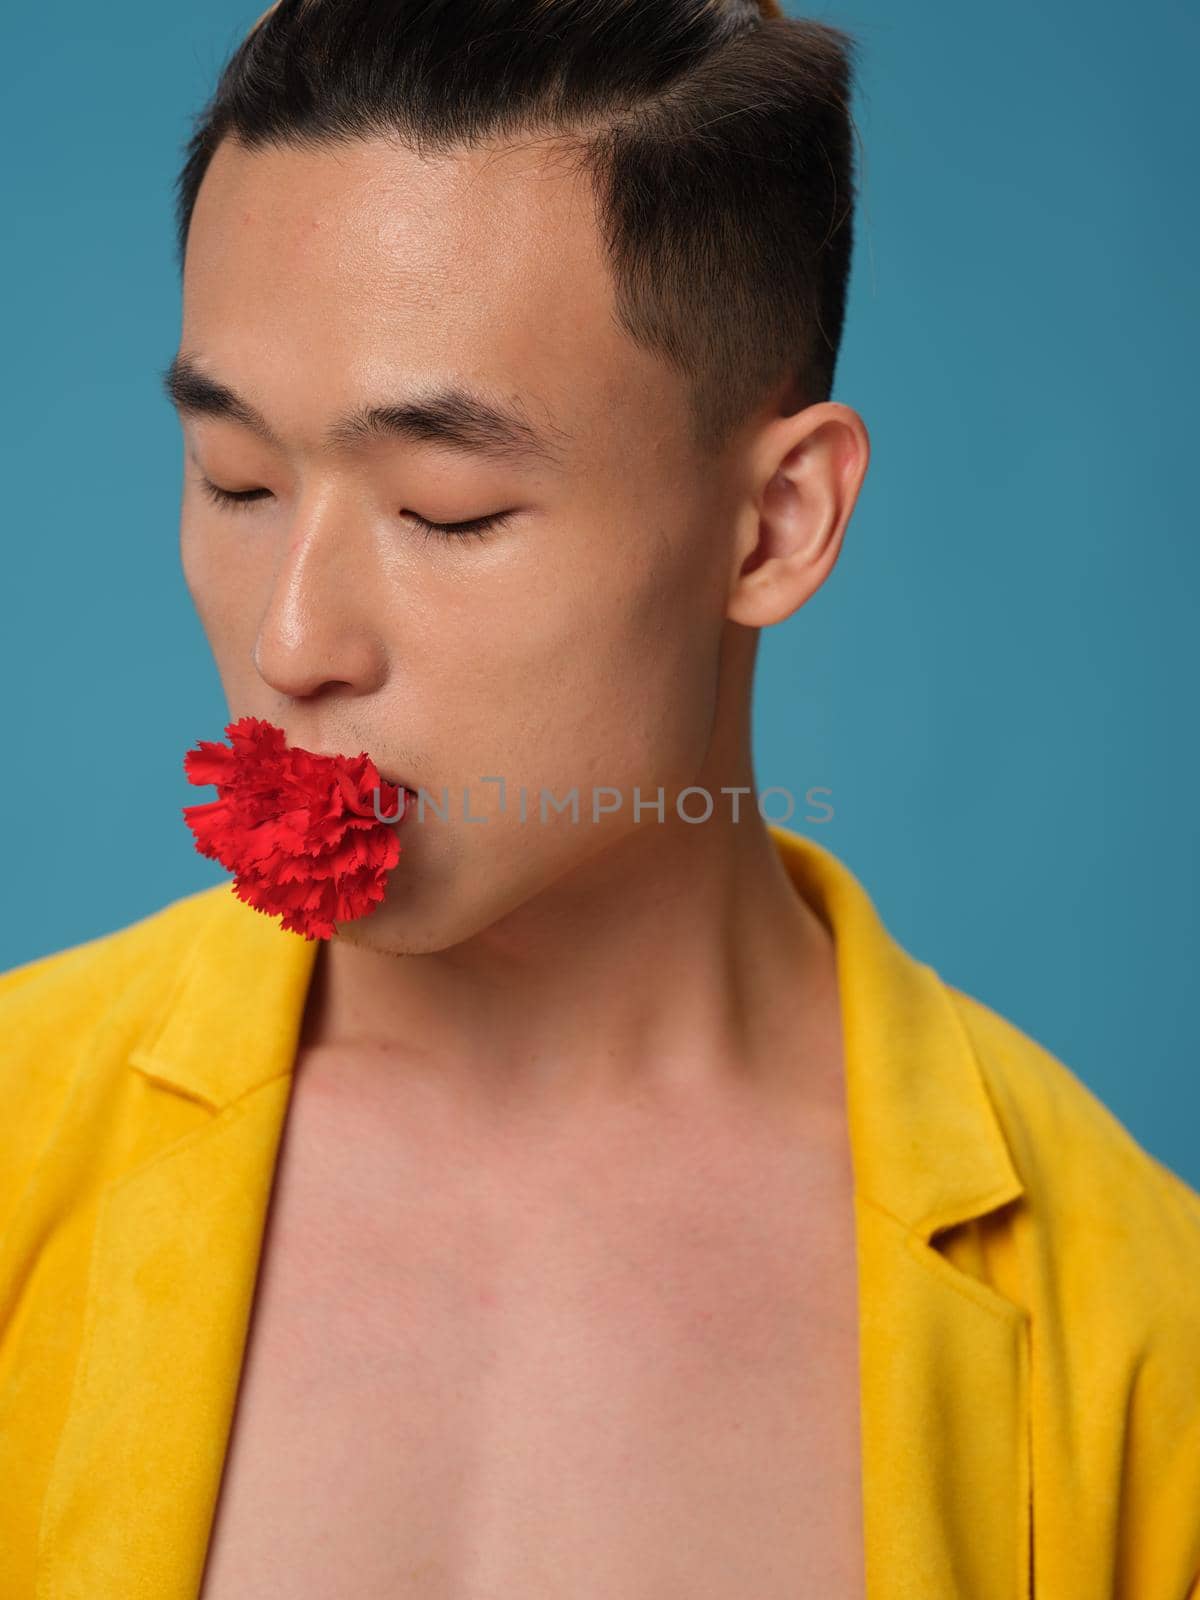 Korean appearance guy with a flower in his mouth on a blue background and a yellow jacket portrait by SHOTPRIME